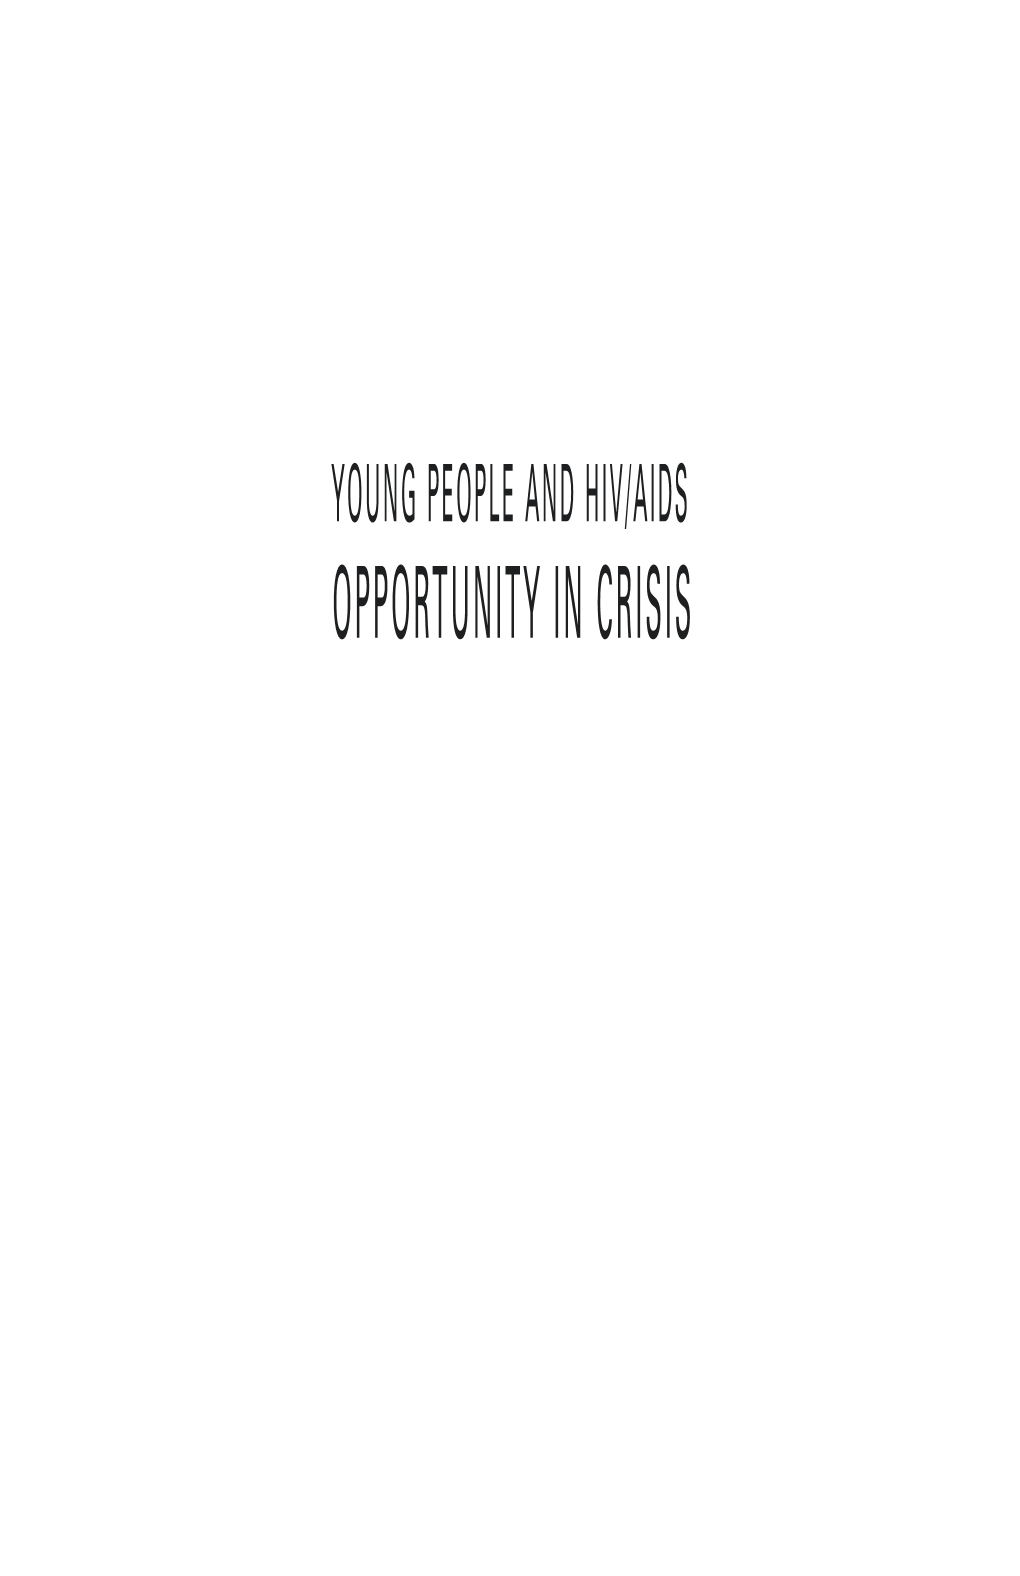 Young People and Hiv/Aids Opportunity in Crisis Table of Contents